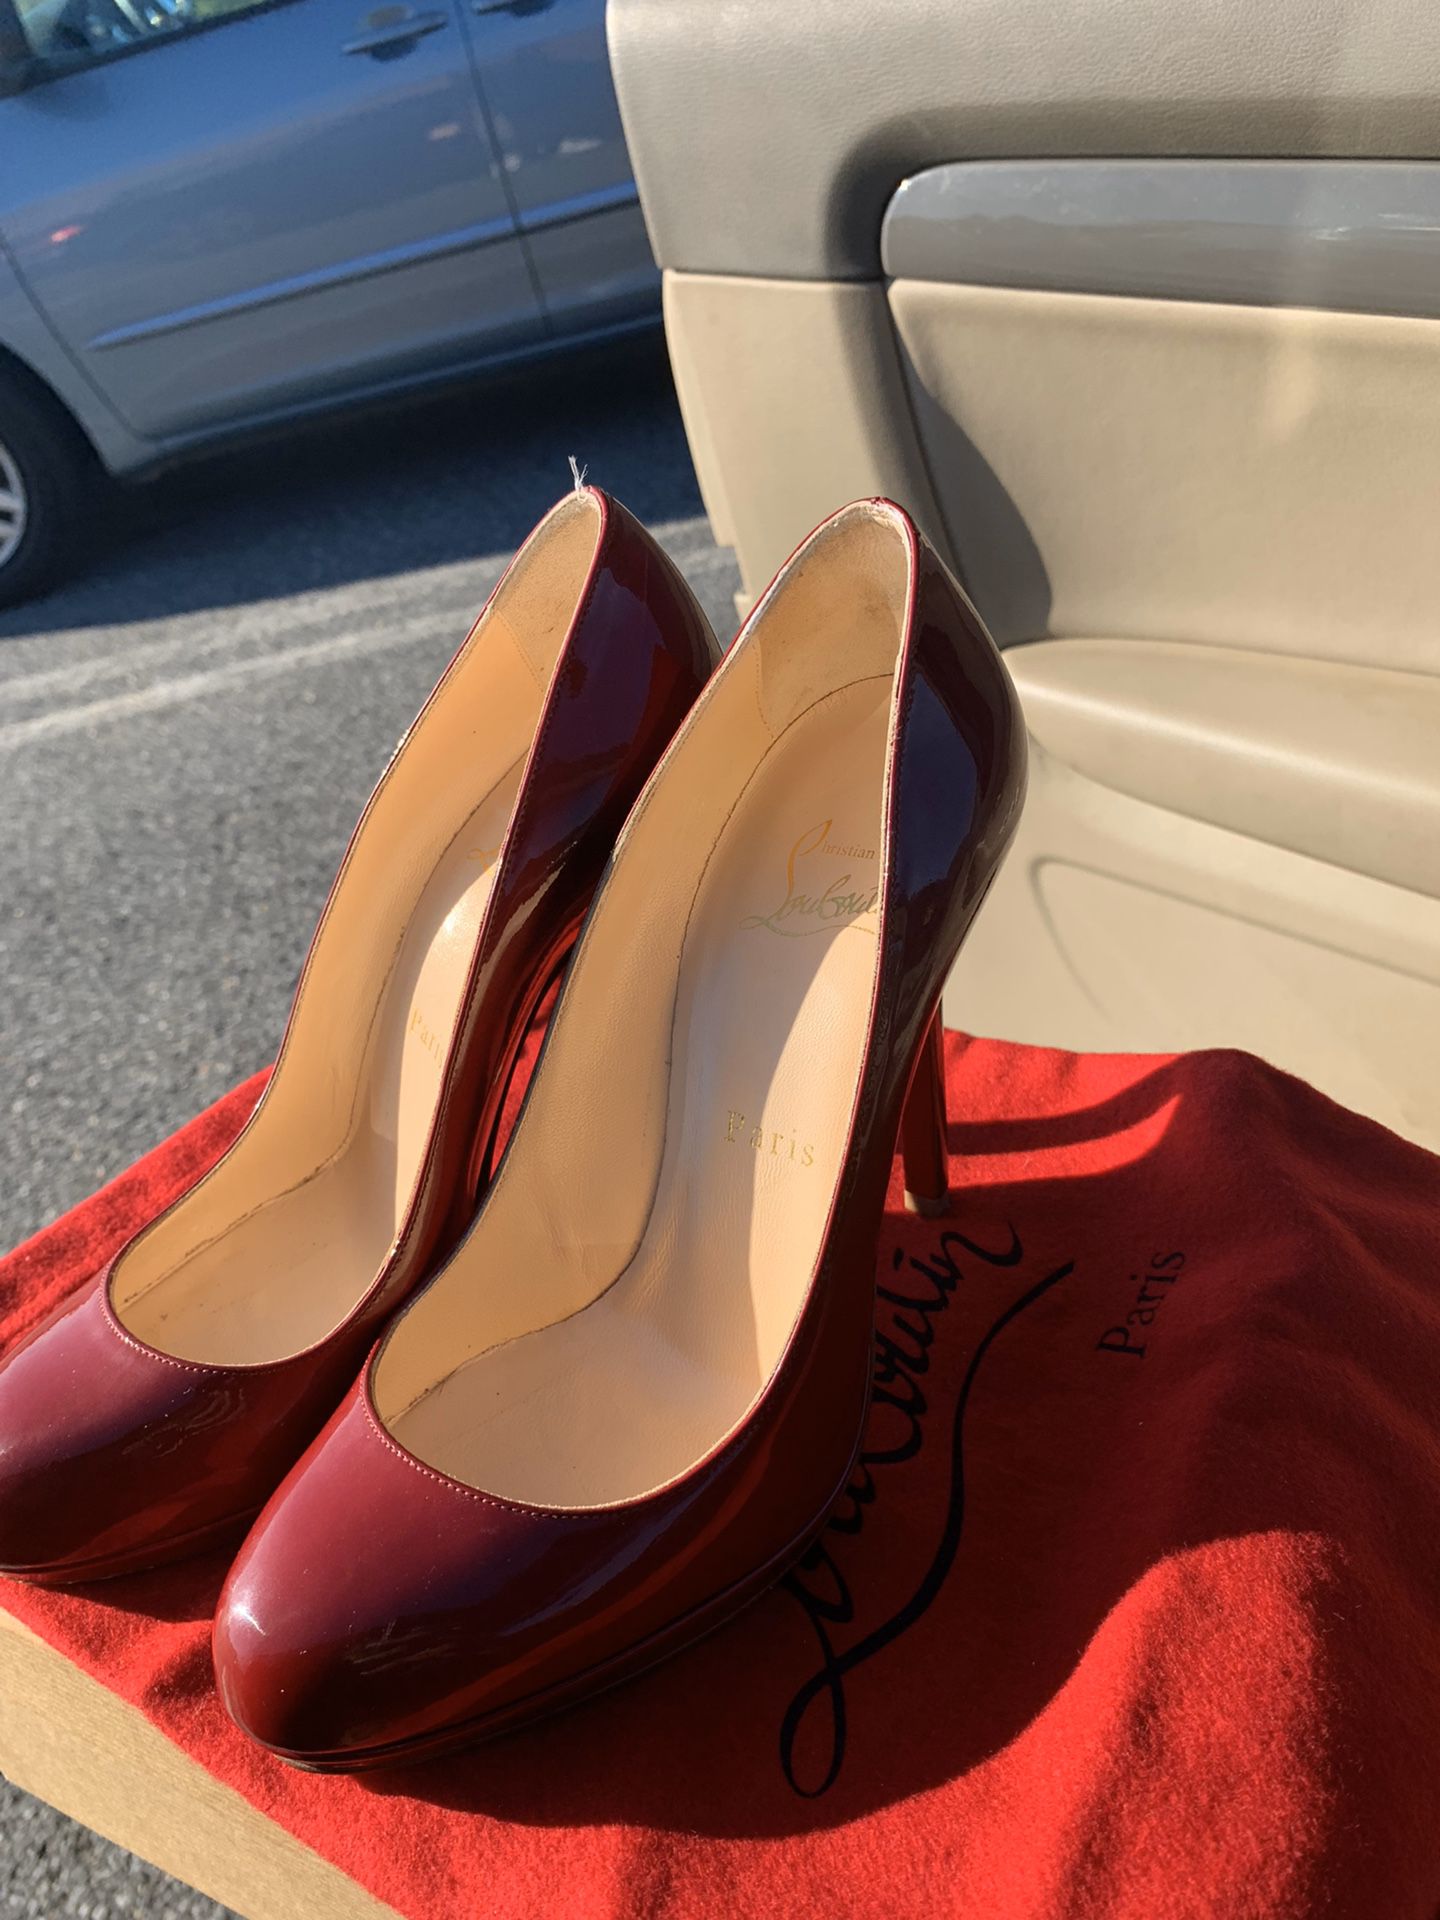 Christian louboutin neofilo 120 patent leather (size 37) red bottom heels